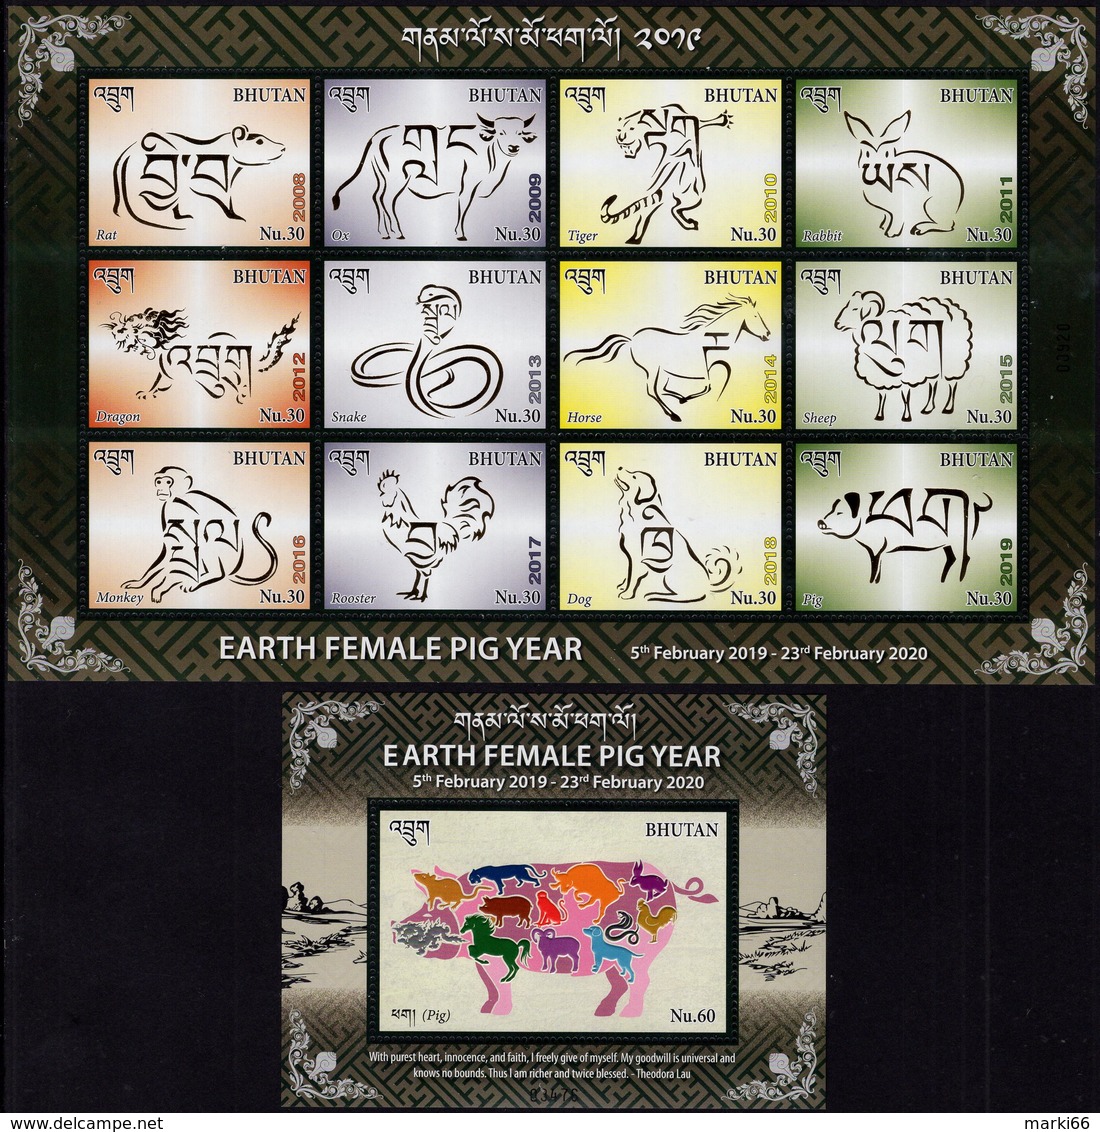 Bhutan - 2019 - Earth Female Pig Year - Mint Souvenir Sheet + Stamp Sheetlet With Hot Foil Intaglio And Embossing - Bhutan